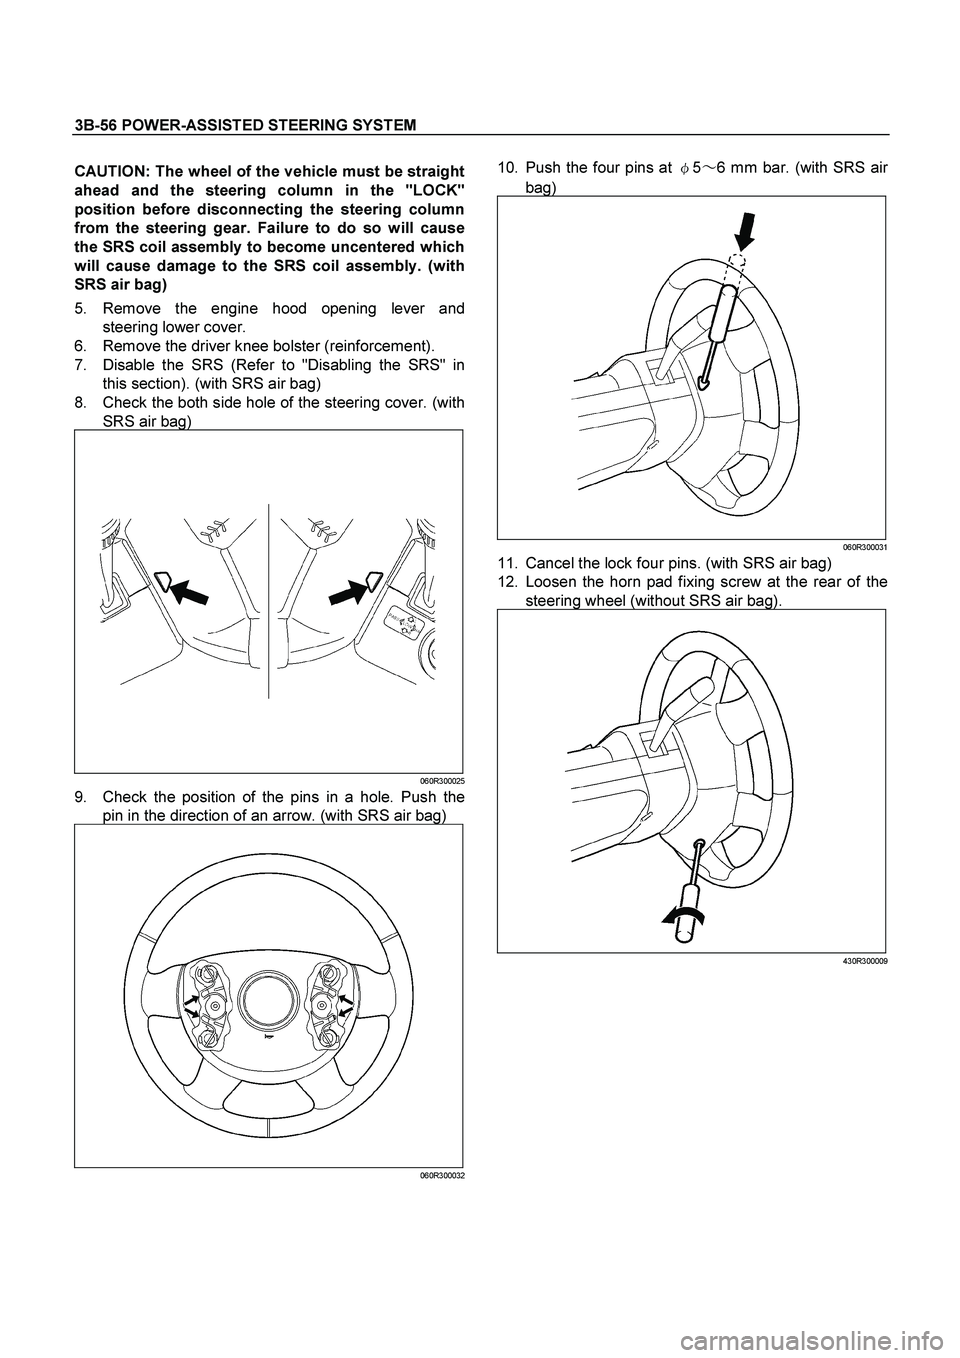 ISUZU TF SERIES 2004 Repair Manual 3B-56 POWER-ASSISTED STEERING SYSTEM
 
CAUTION: The wheel of the vehicle must be straight
ahead and the steering column in the "LOCK"
position before disconnecting the steering column
from the steerin